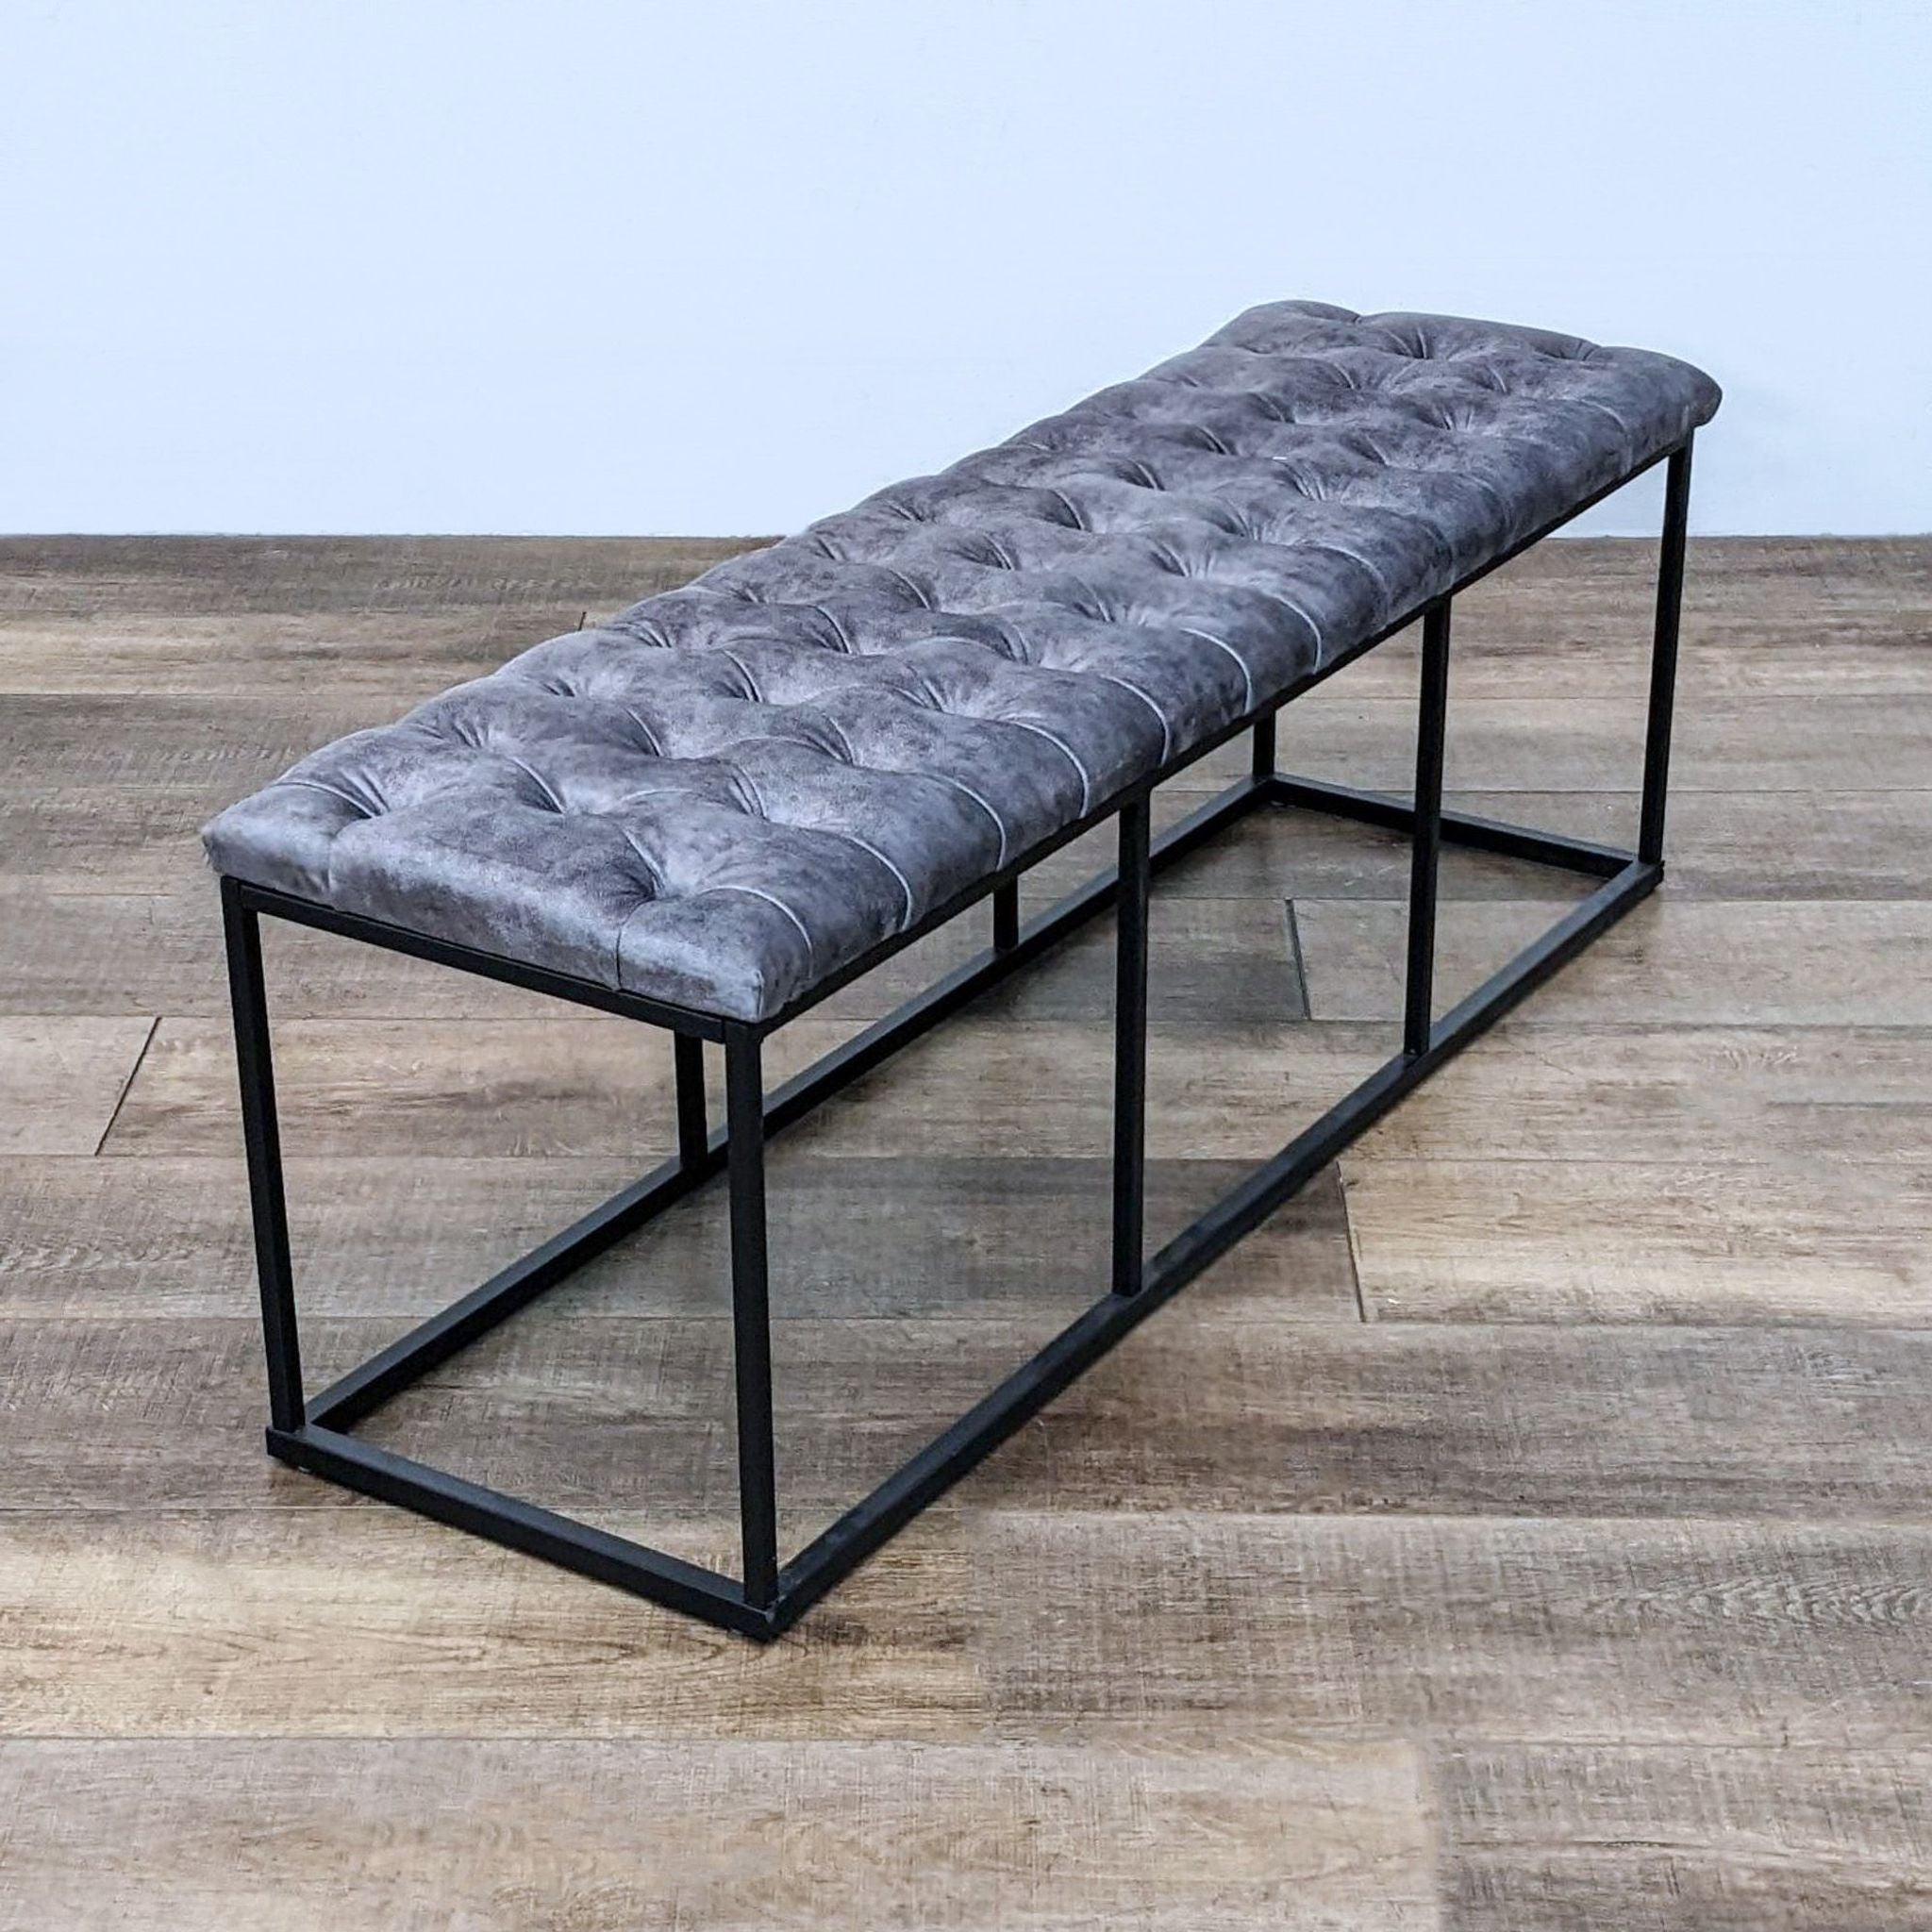 Tufted leather bench by Reperch, with dark metal frame, 52 inches, showcased on a wooden floor.